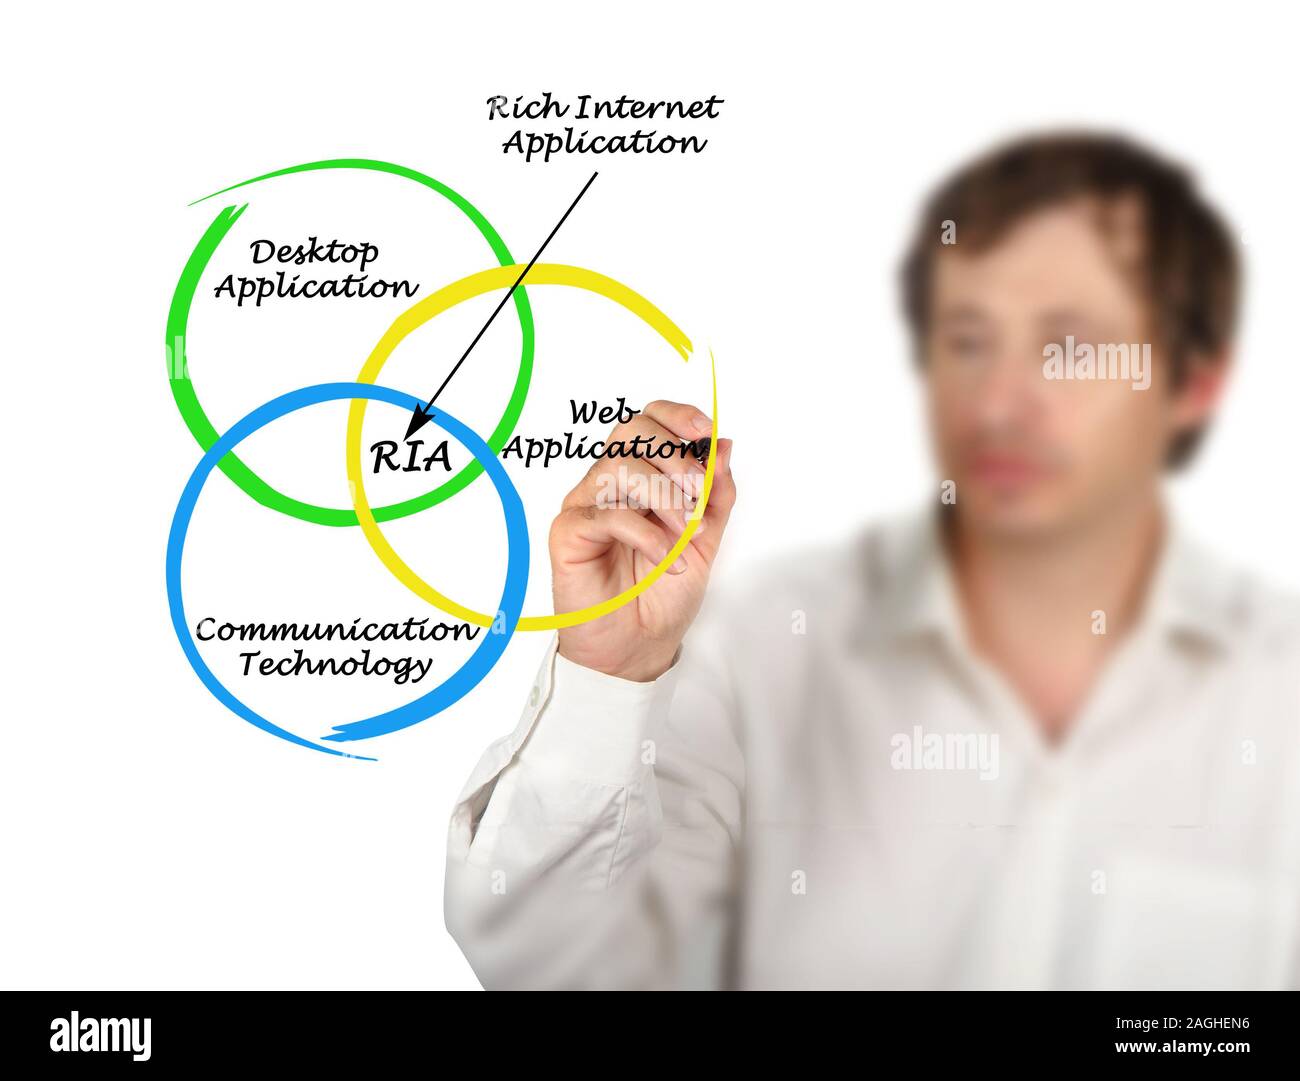 Diagram of rich internet application Stock Photo